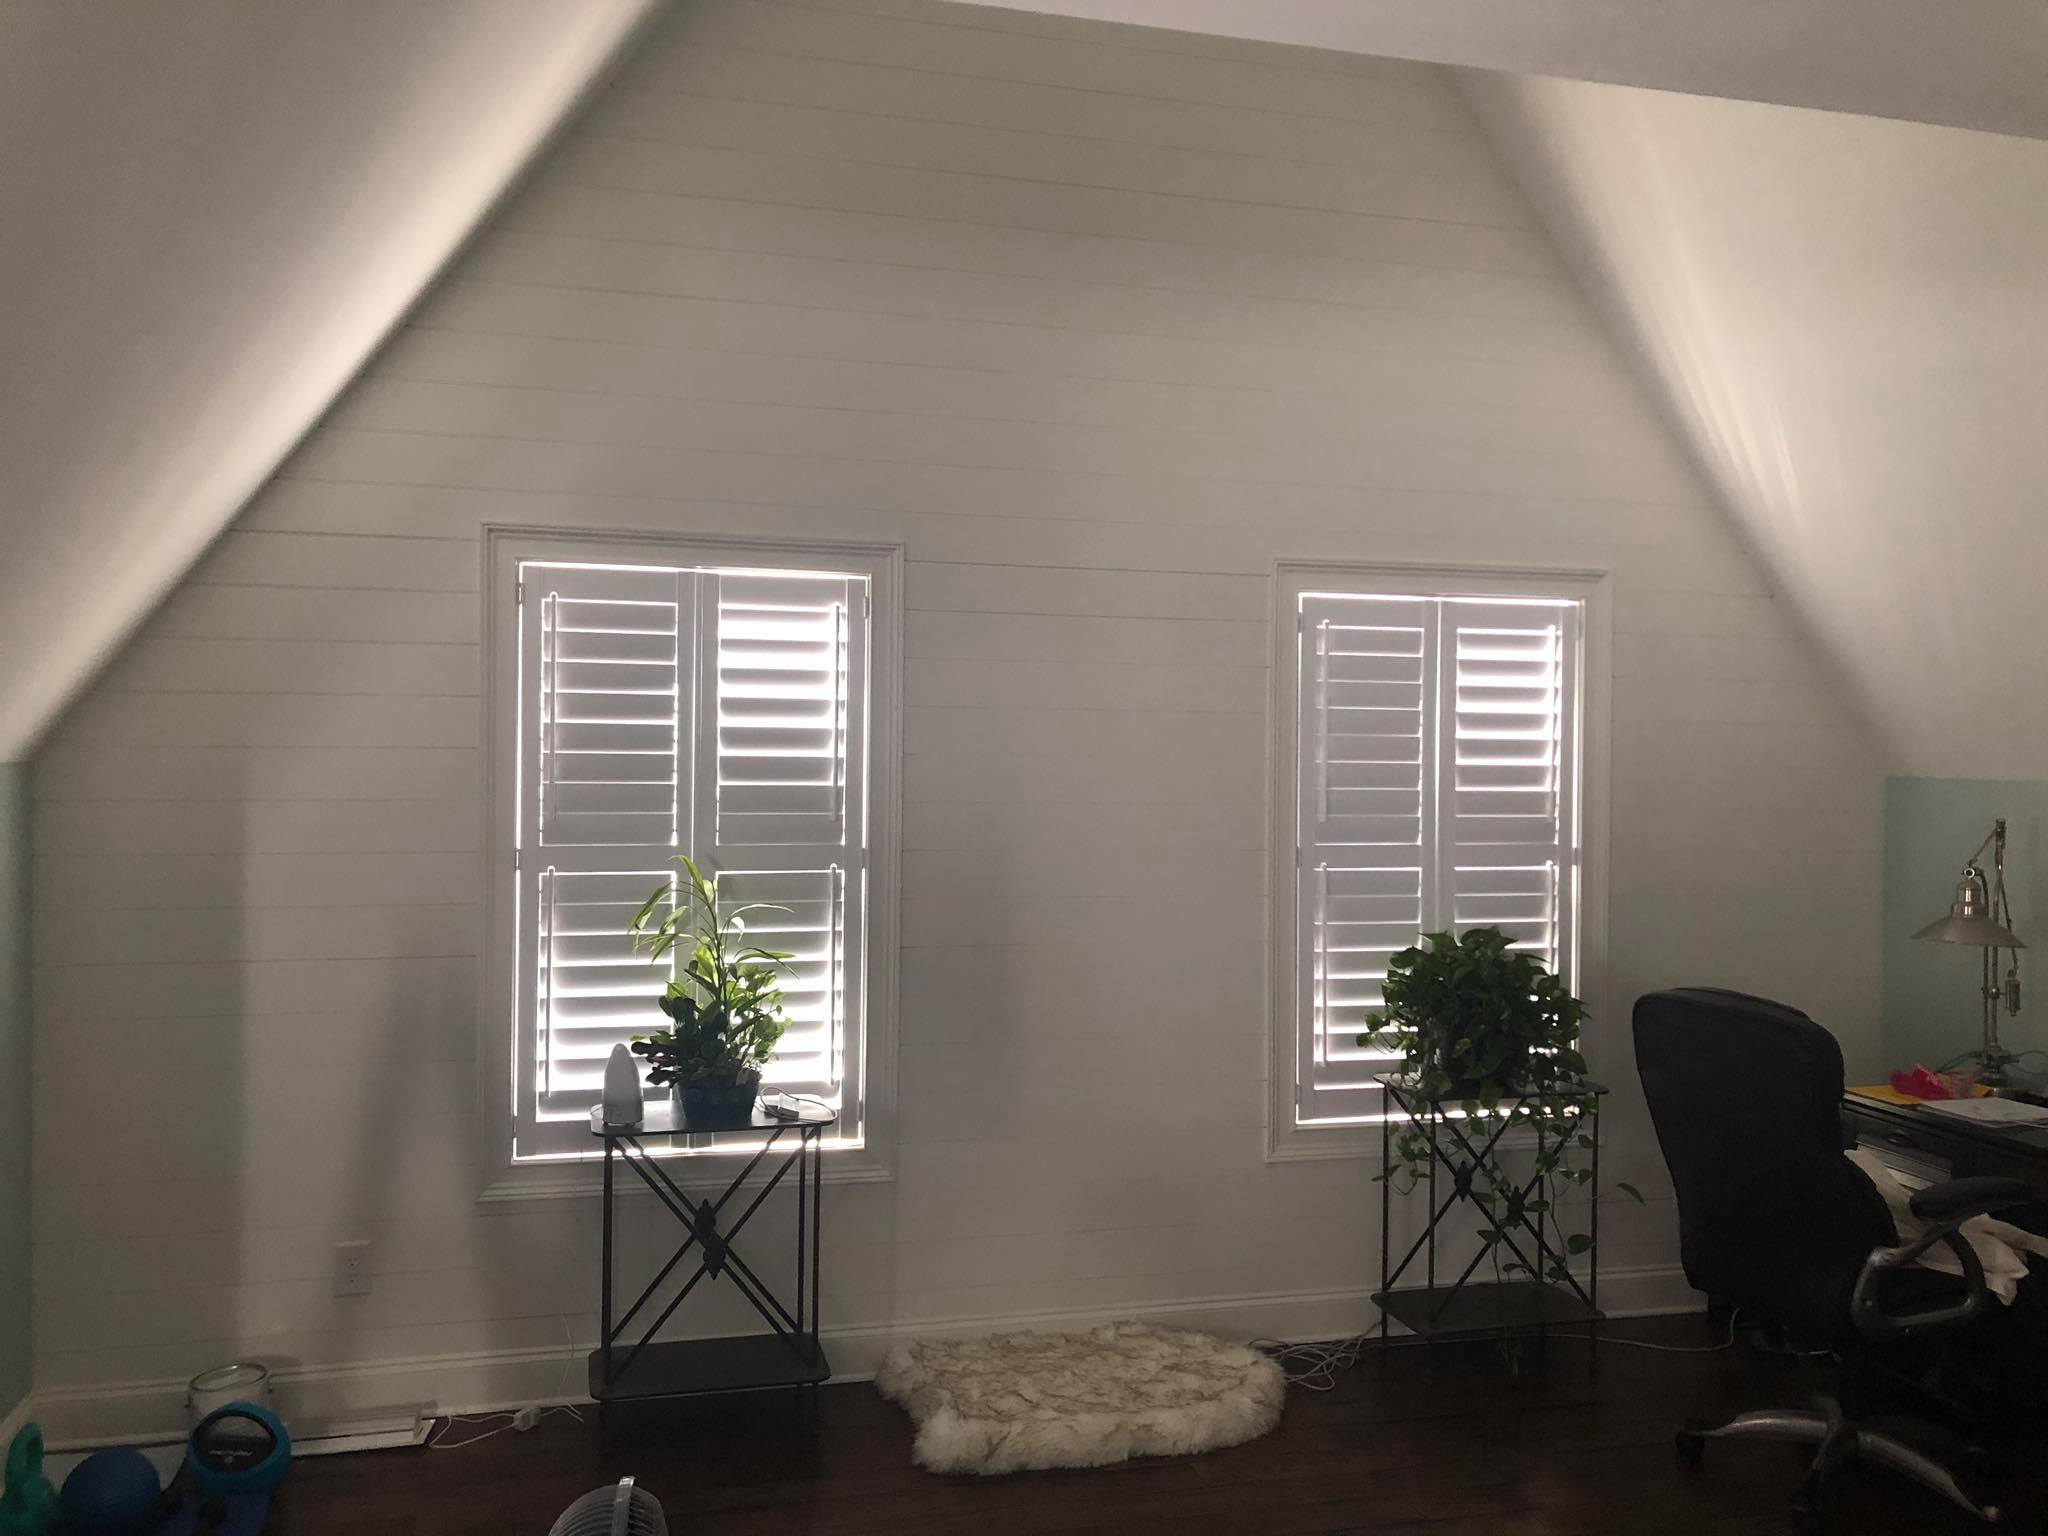 Shiplap On Walls Painted White with Hardwood Floor Installed 7